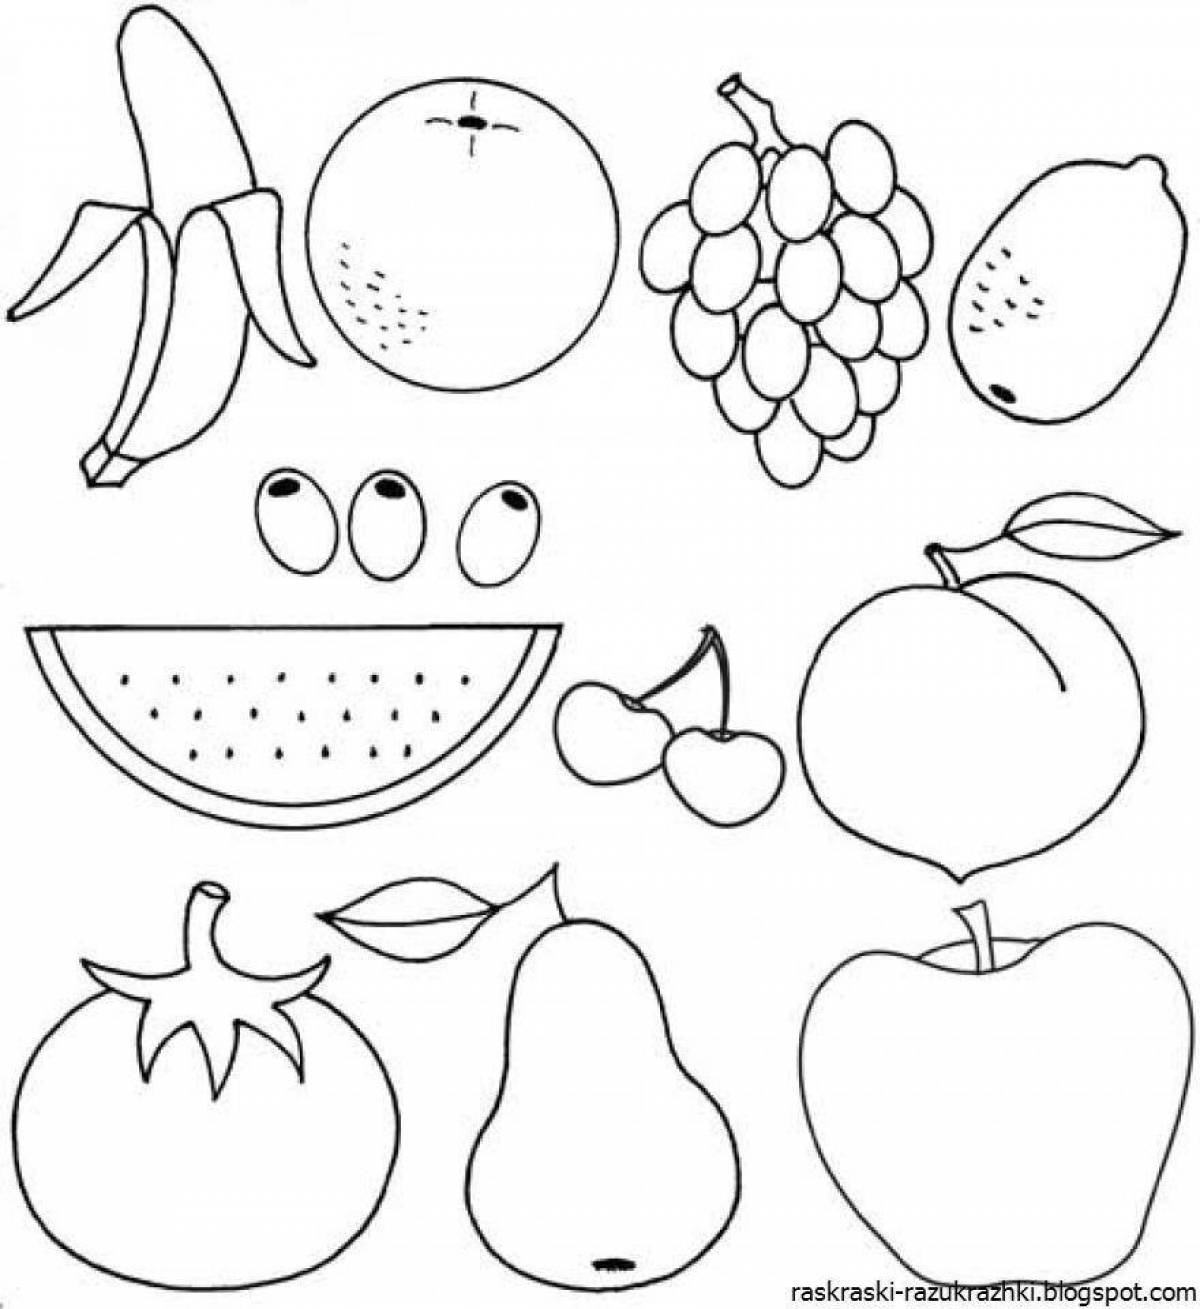 Bright and fun fruit coloring pages for kids 5-6 years old